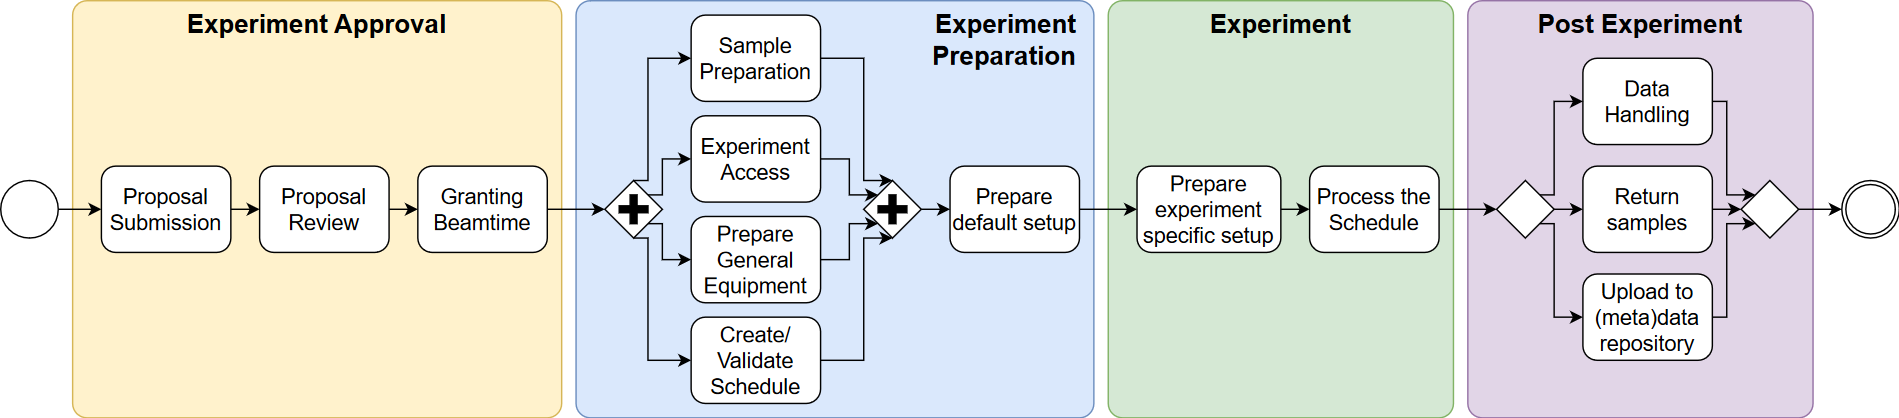 flow_phases_processes.png